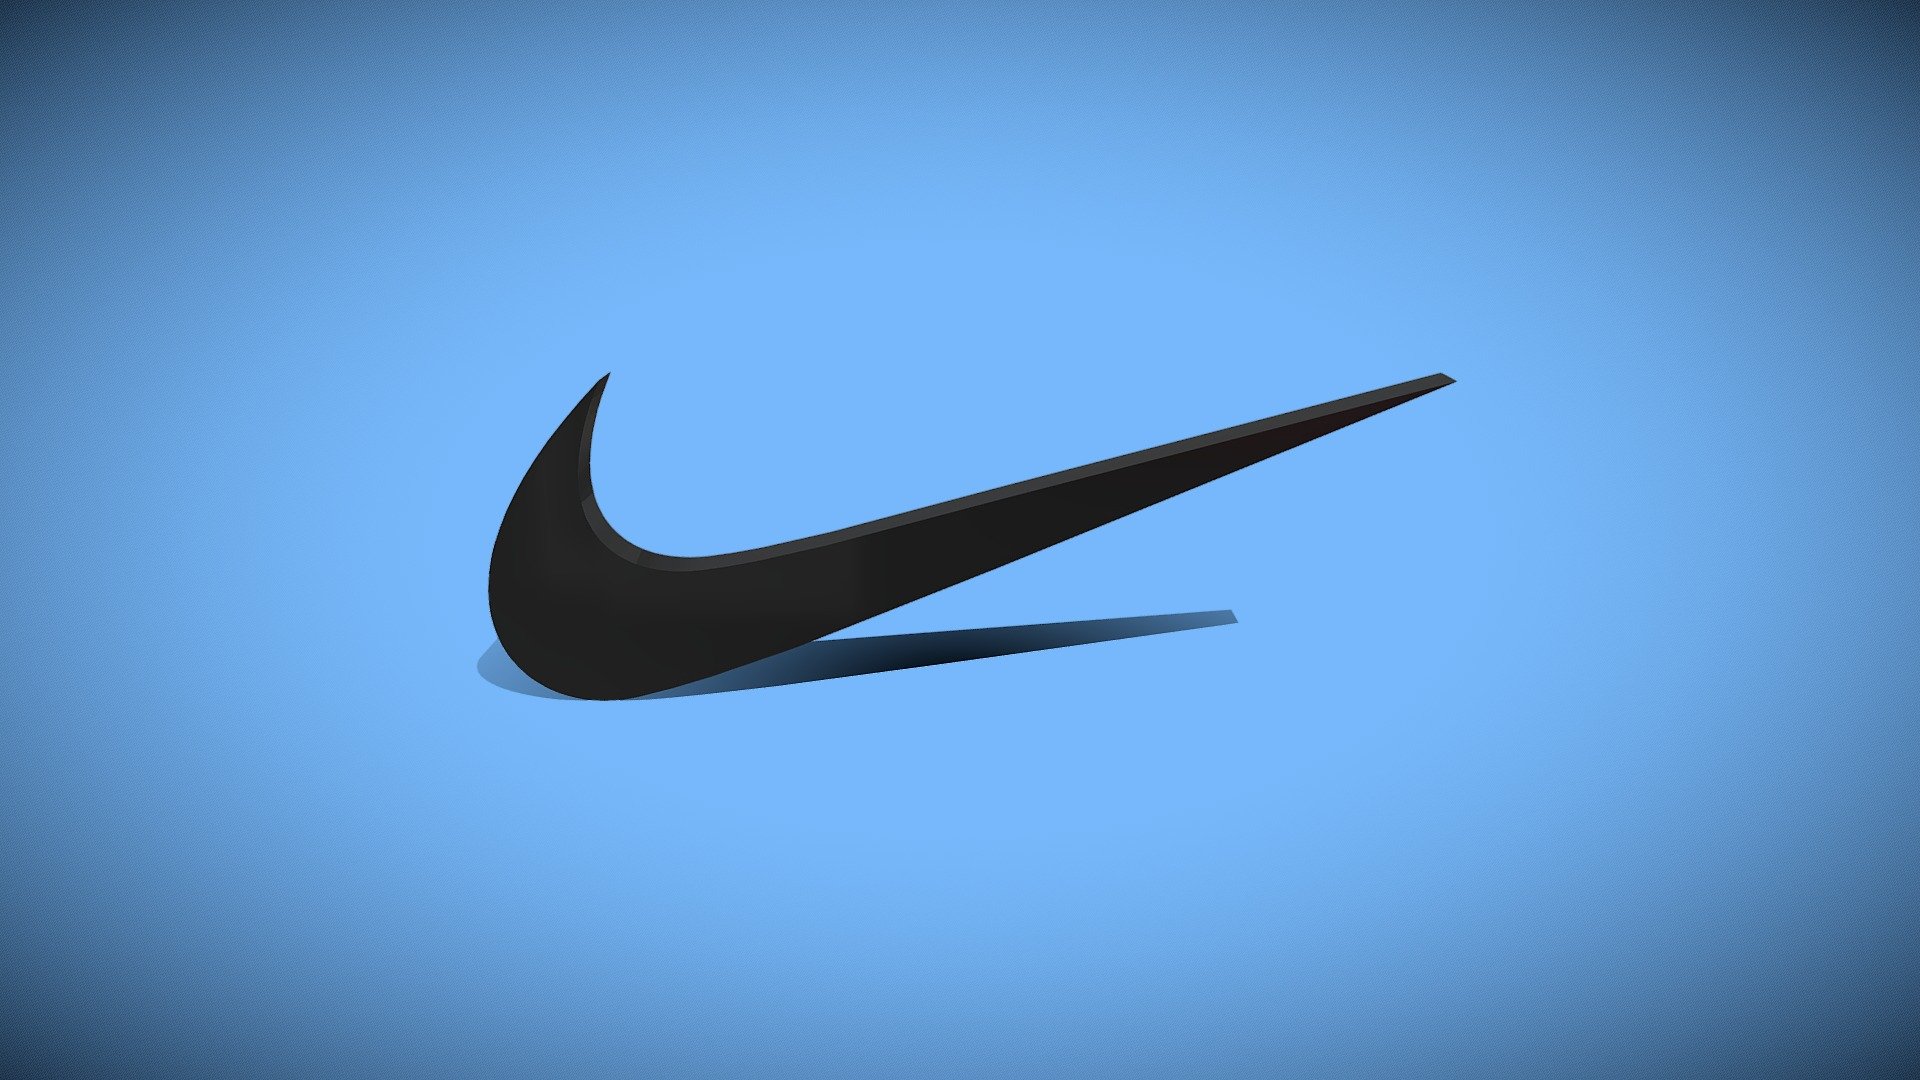 Nike Logo modeled in 3ds max 2017 and rendered in vray 3.4 and keyshot 9.3.

Made with Editable spline and applied mesh later.

Made for Tutorial and compactible as 3D Printable model.

Model Size : 22x8x1cm.

Polys : 446 and Verts : 228 3d model